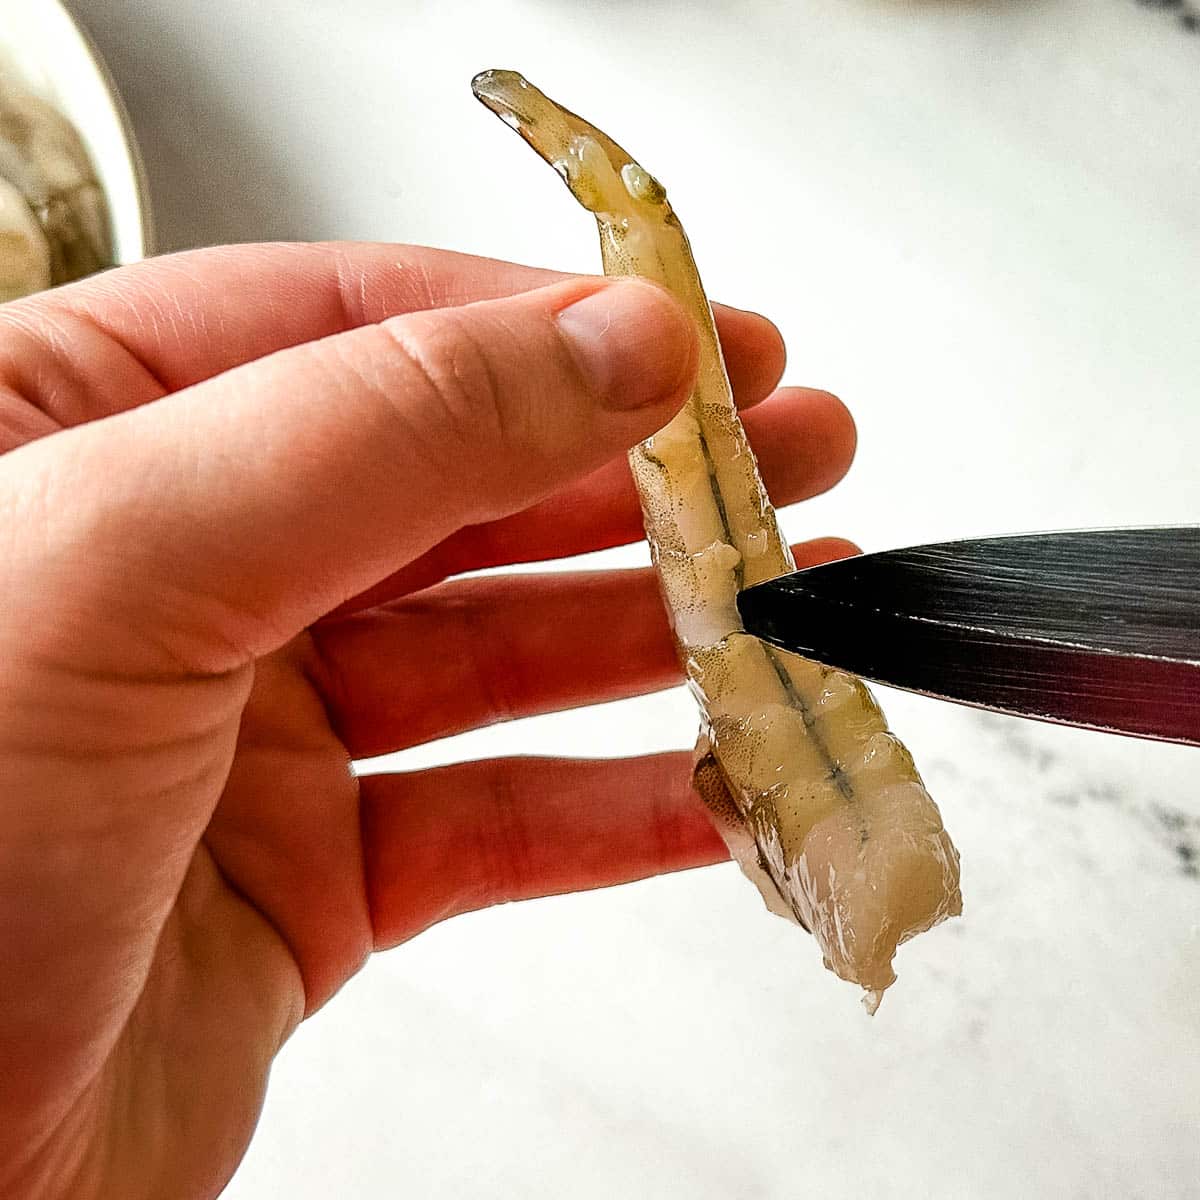 the interior of a shrimp is pierced with a black paring knife.